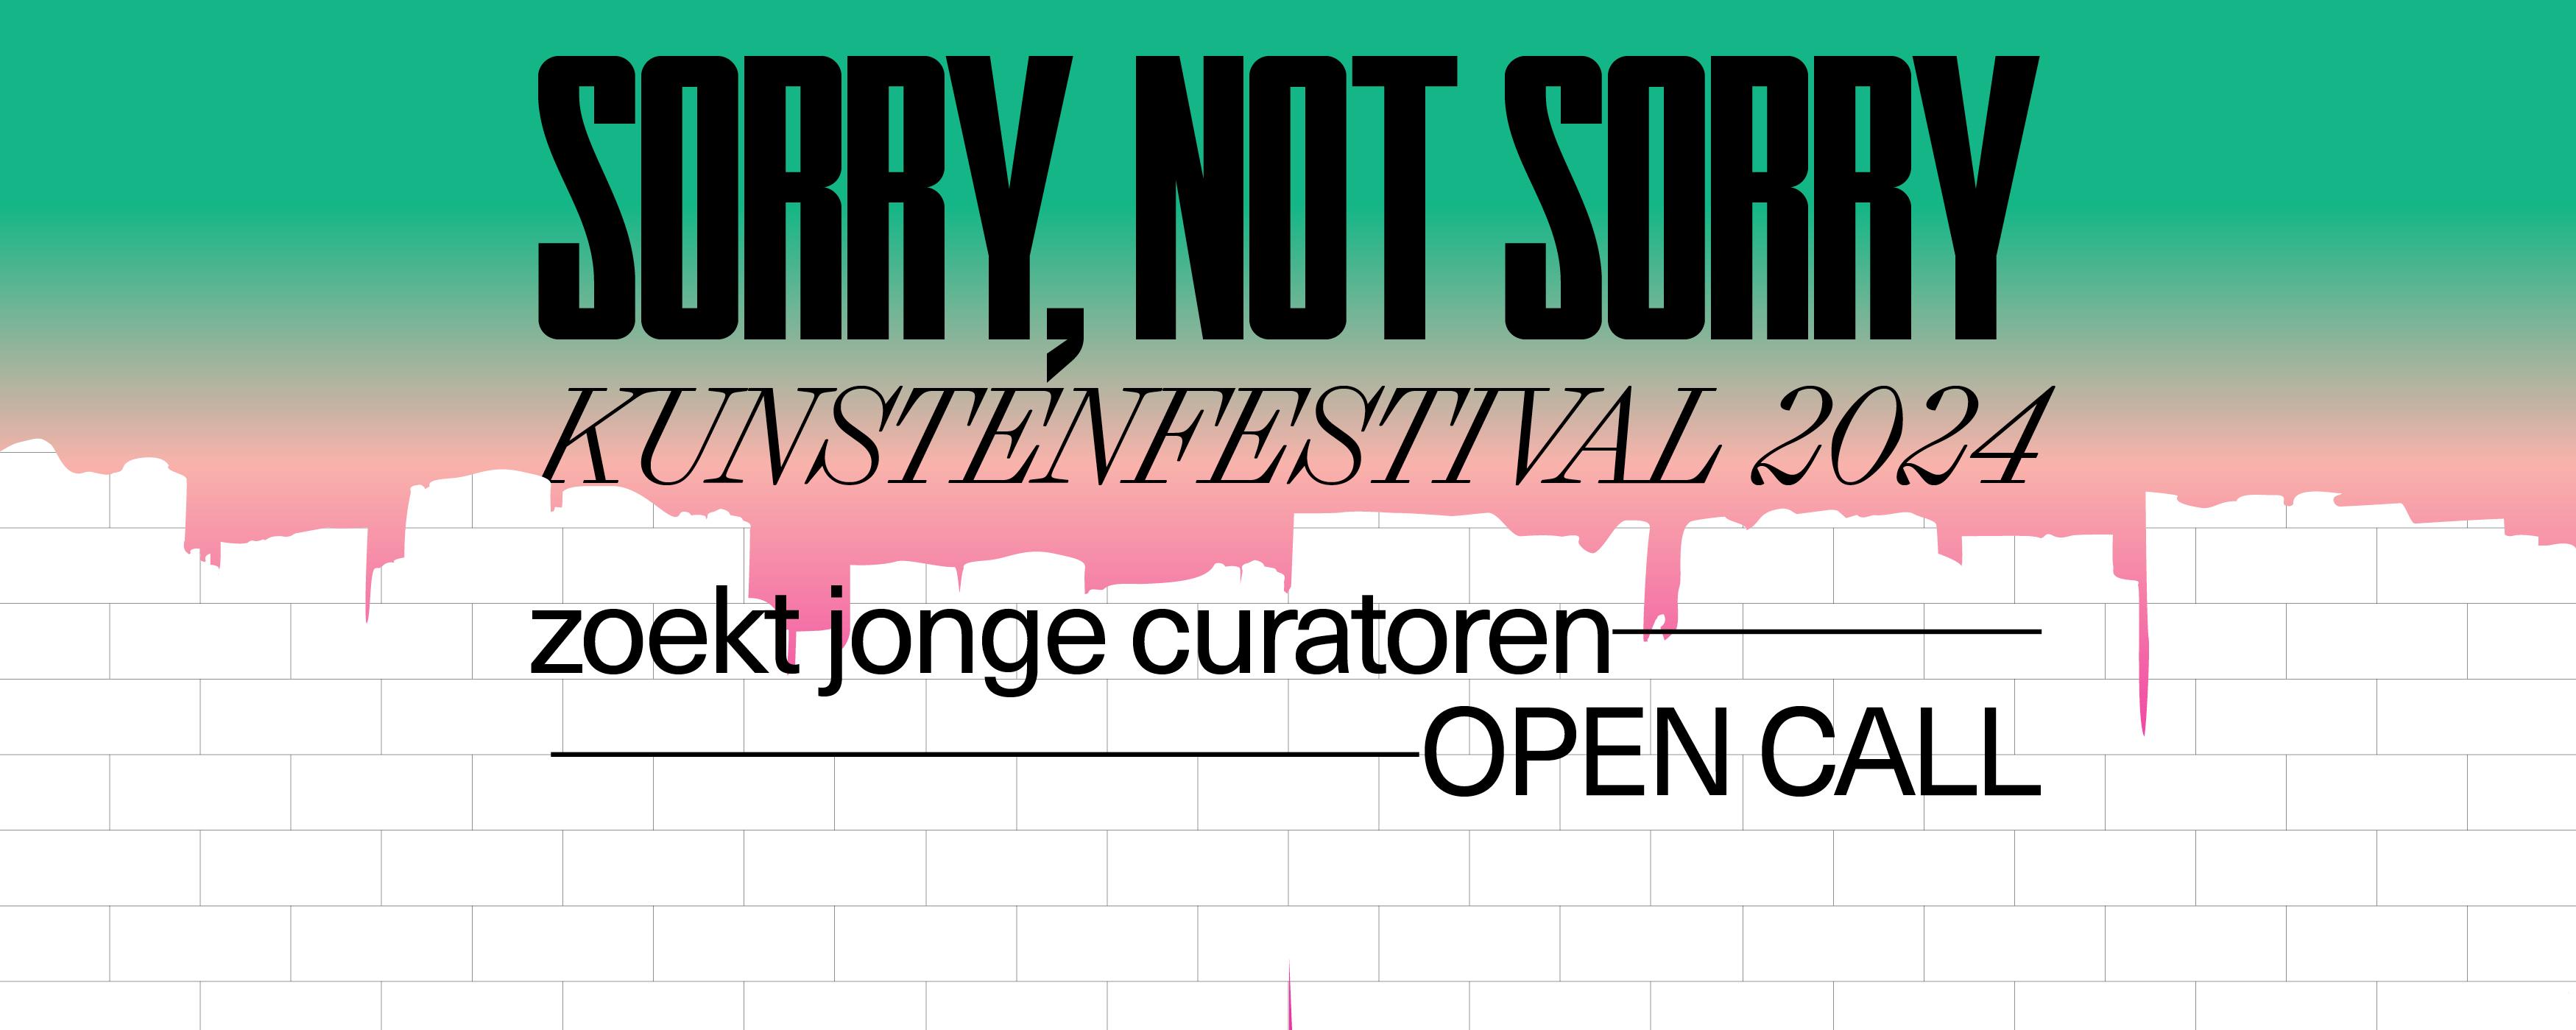 campagnebeeld Sorry Not Sorry festival 2024